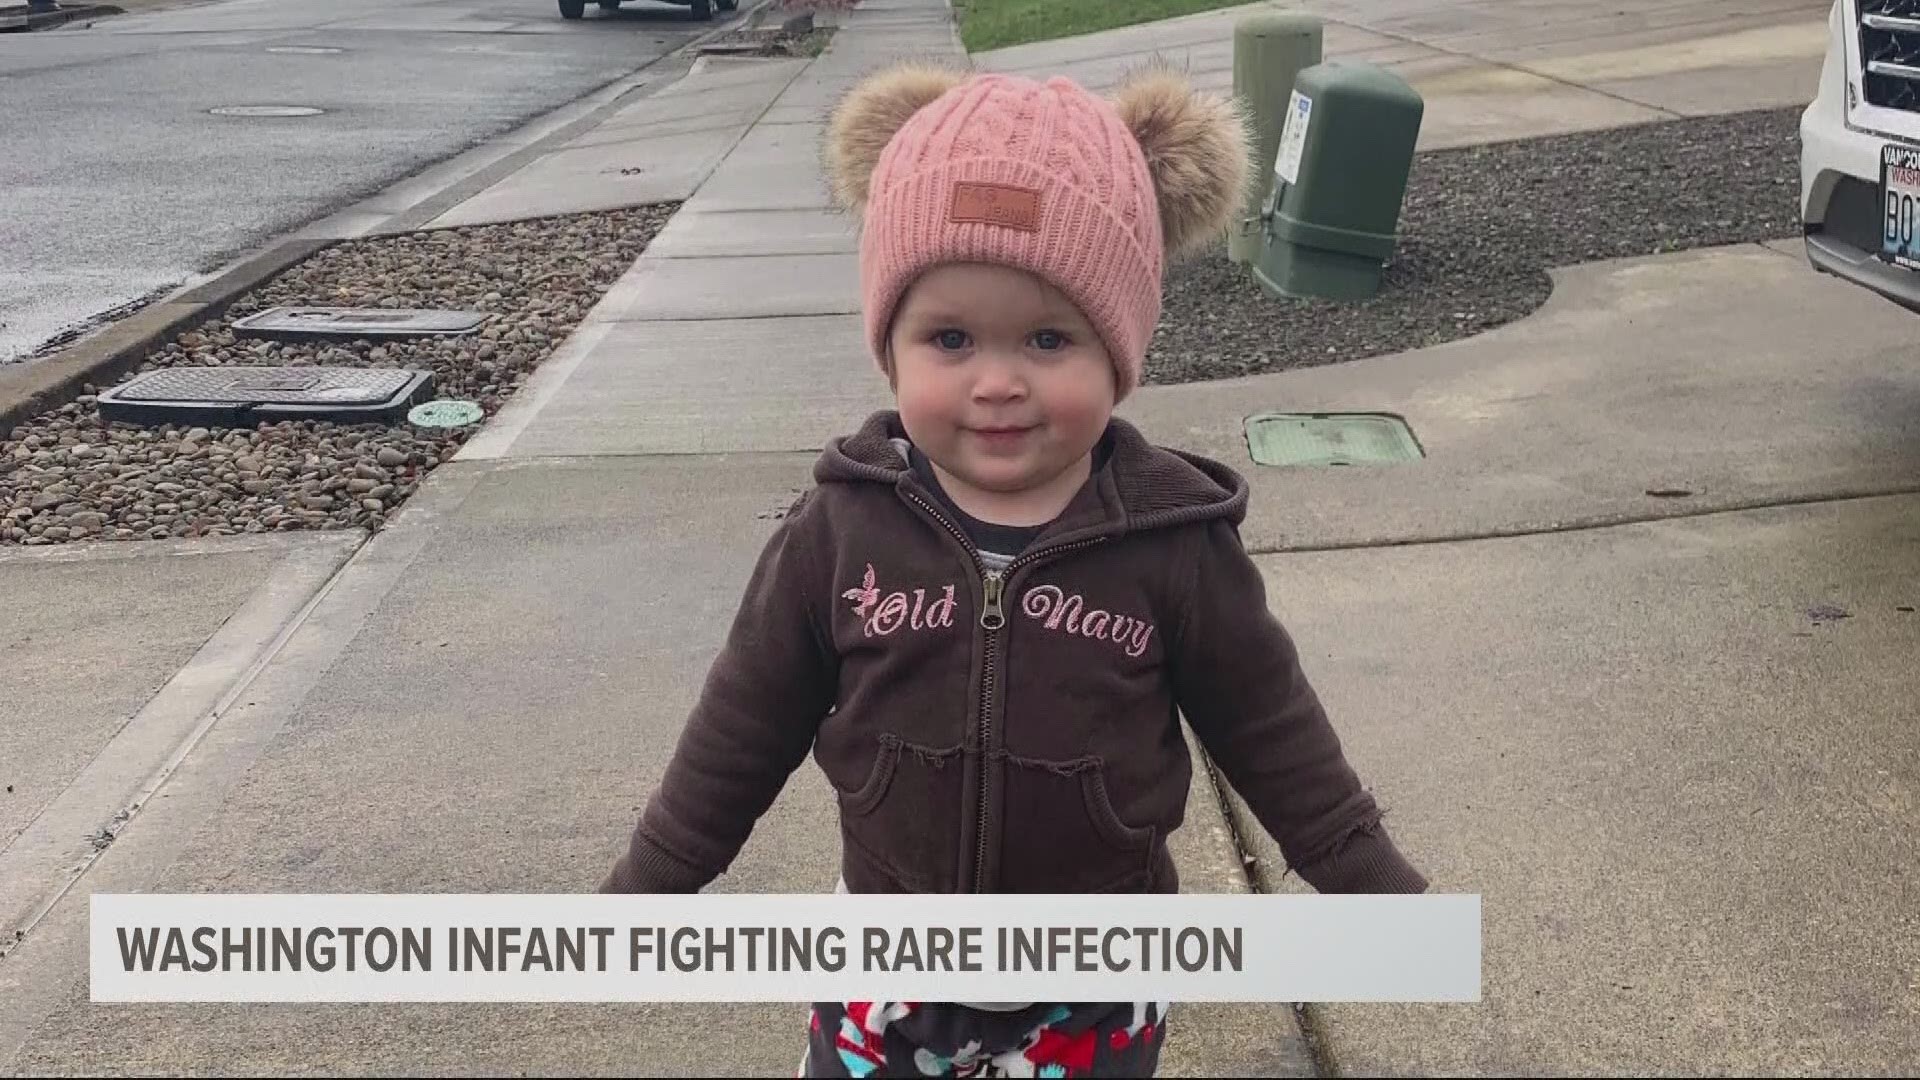 A Washington baby is fighting for her life after getting an extremely rare infection in her blood. Morgan Romero spoke with her family and shares their warning.